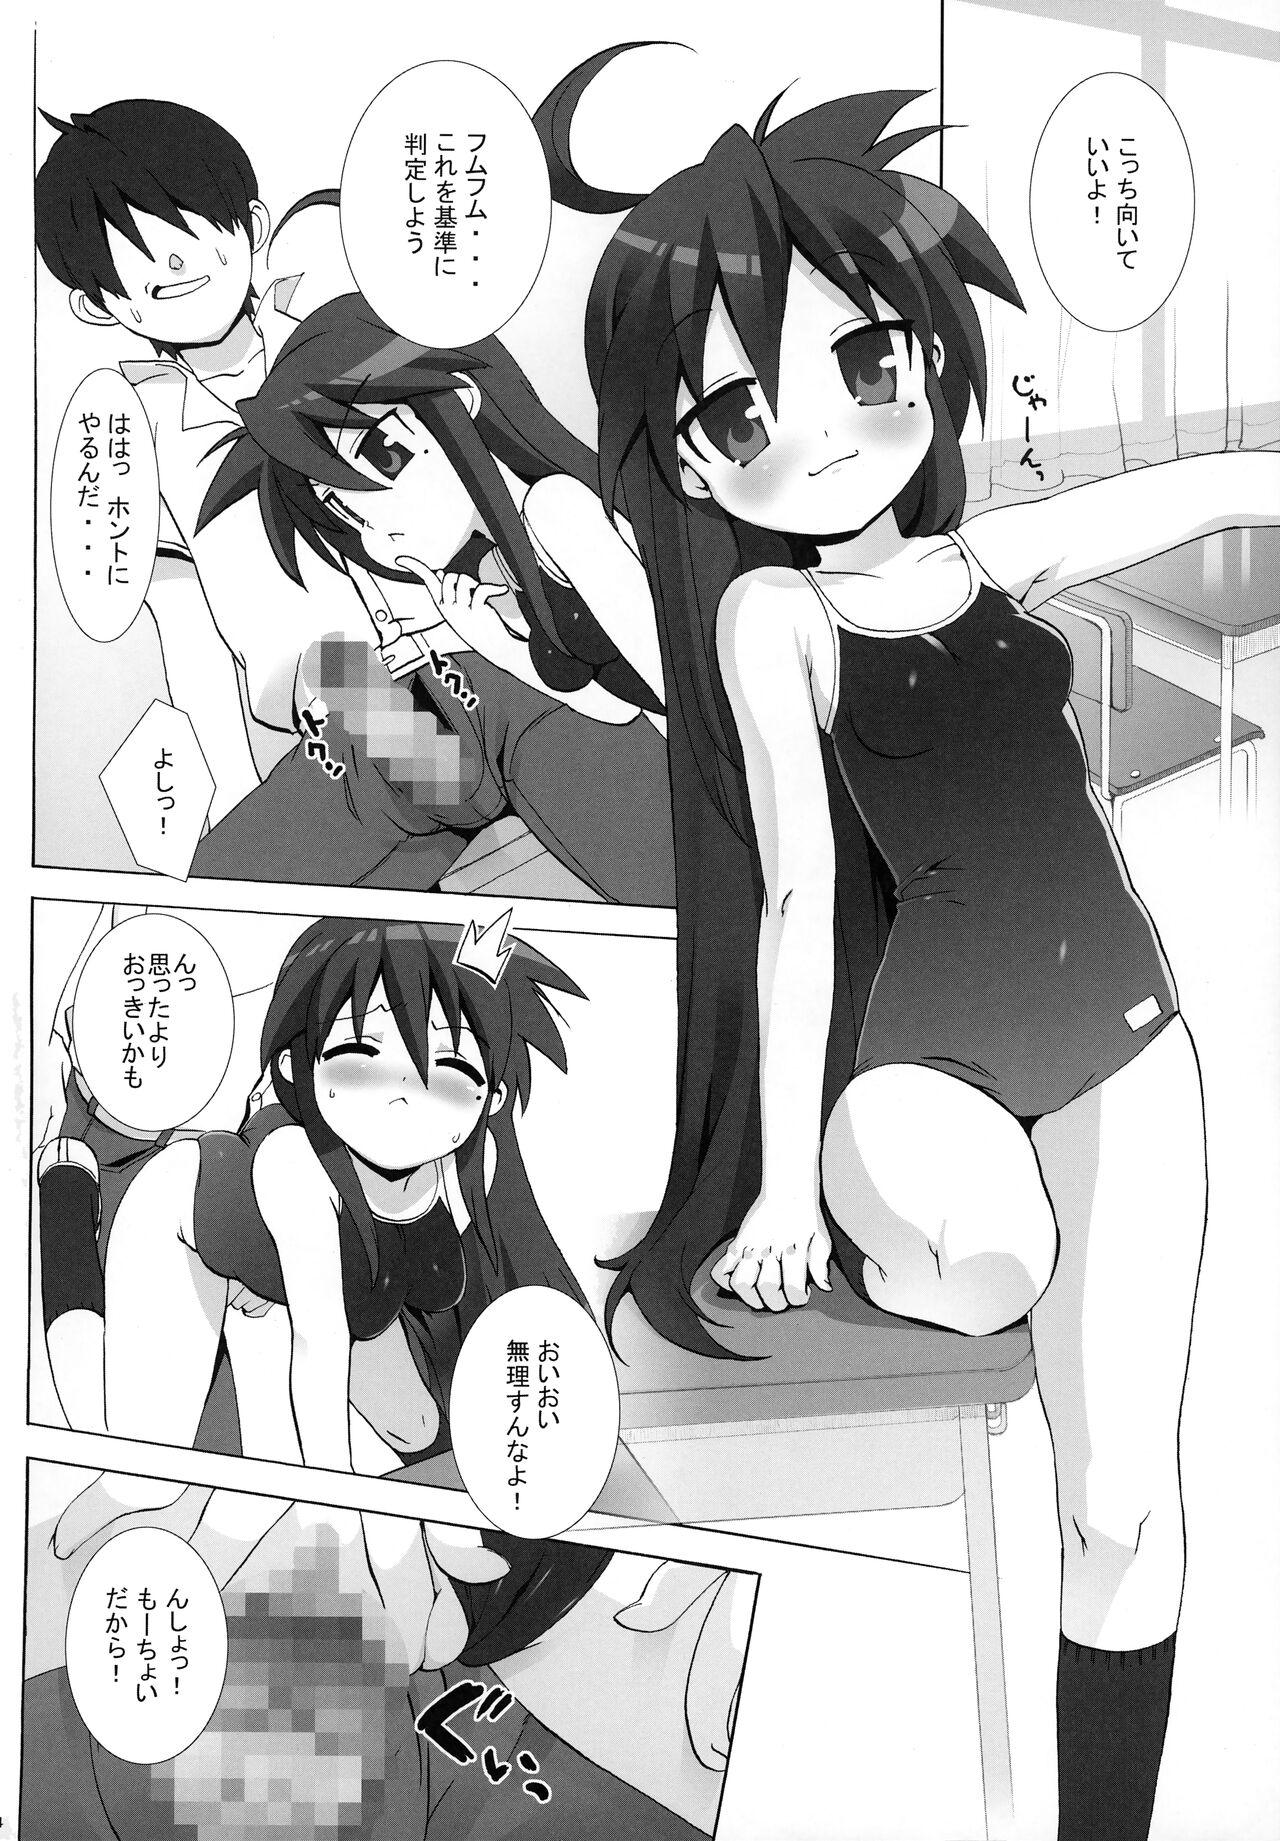 Petite Lucky Play - Lucky star Thief - Page 3